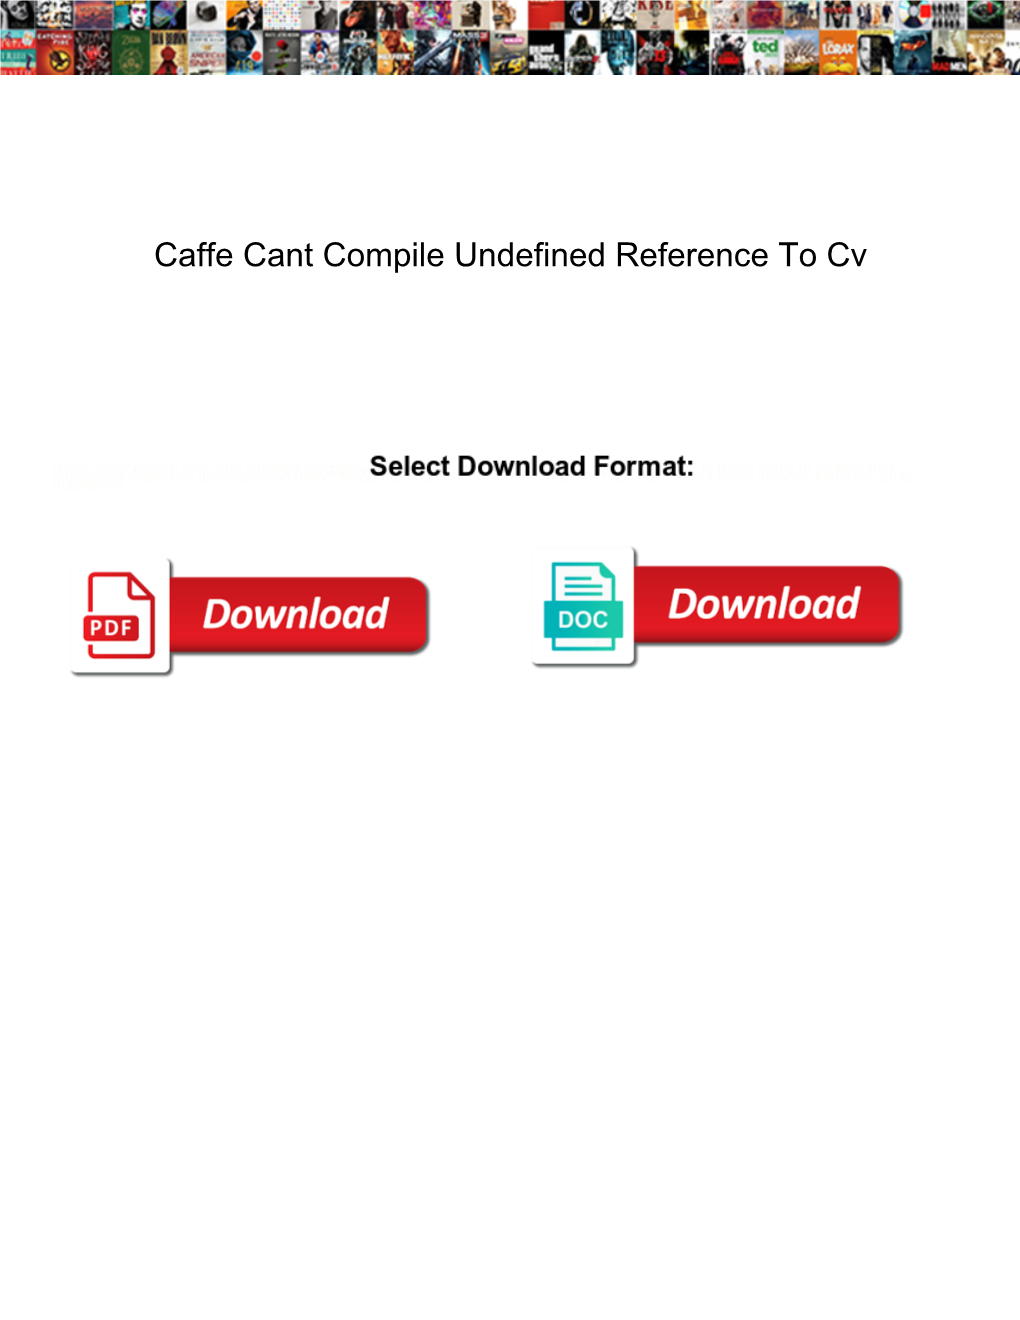 Caffe Cant Compile Undefined Reference to Cv